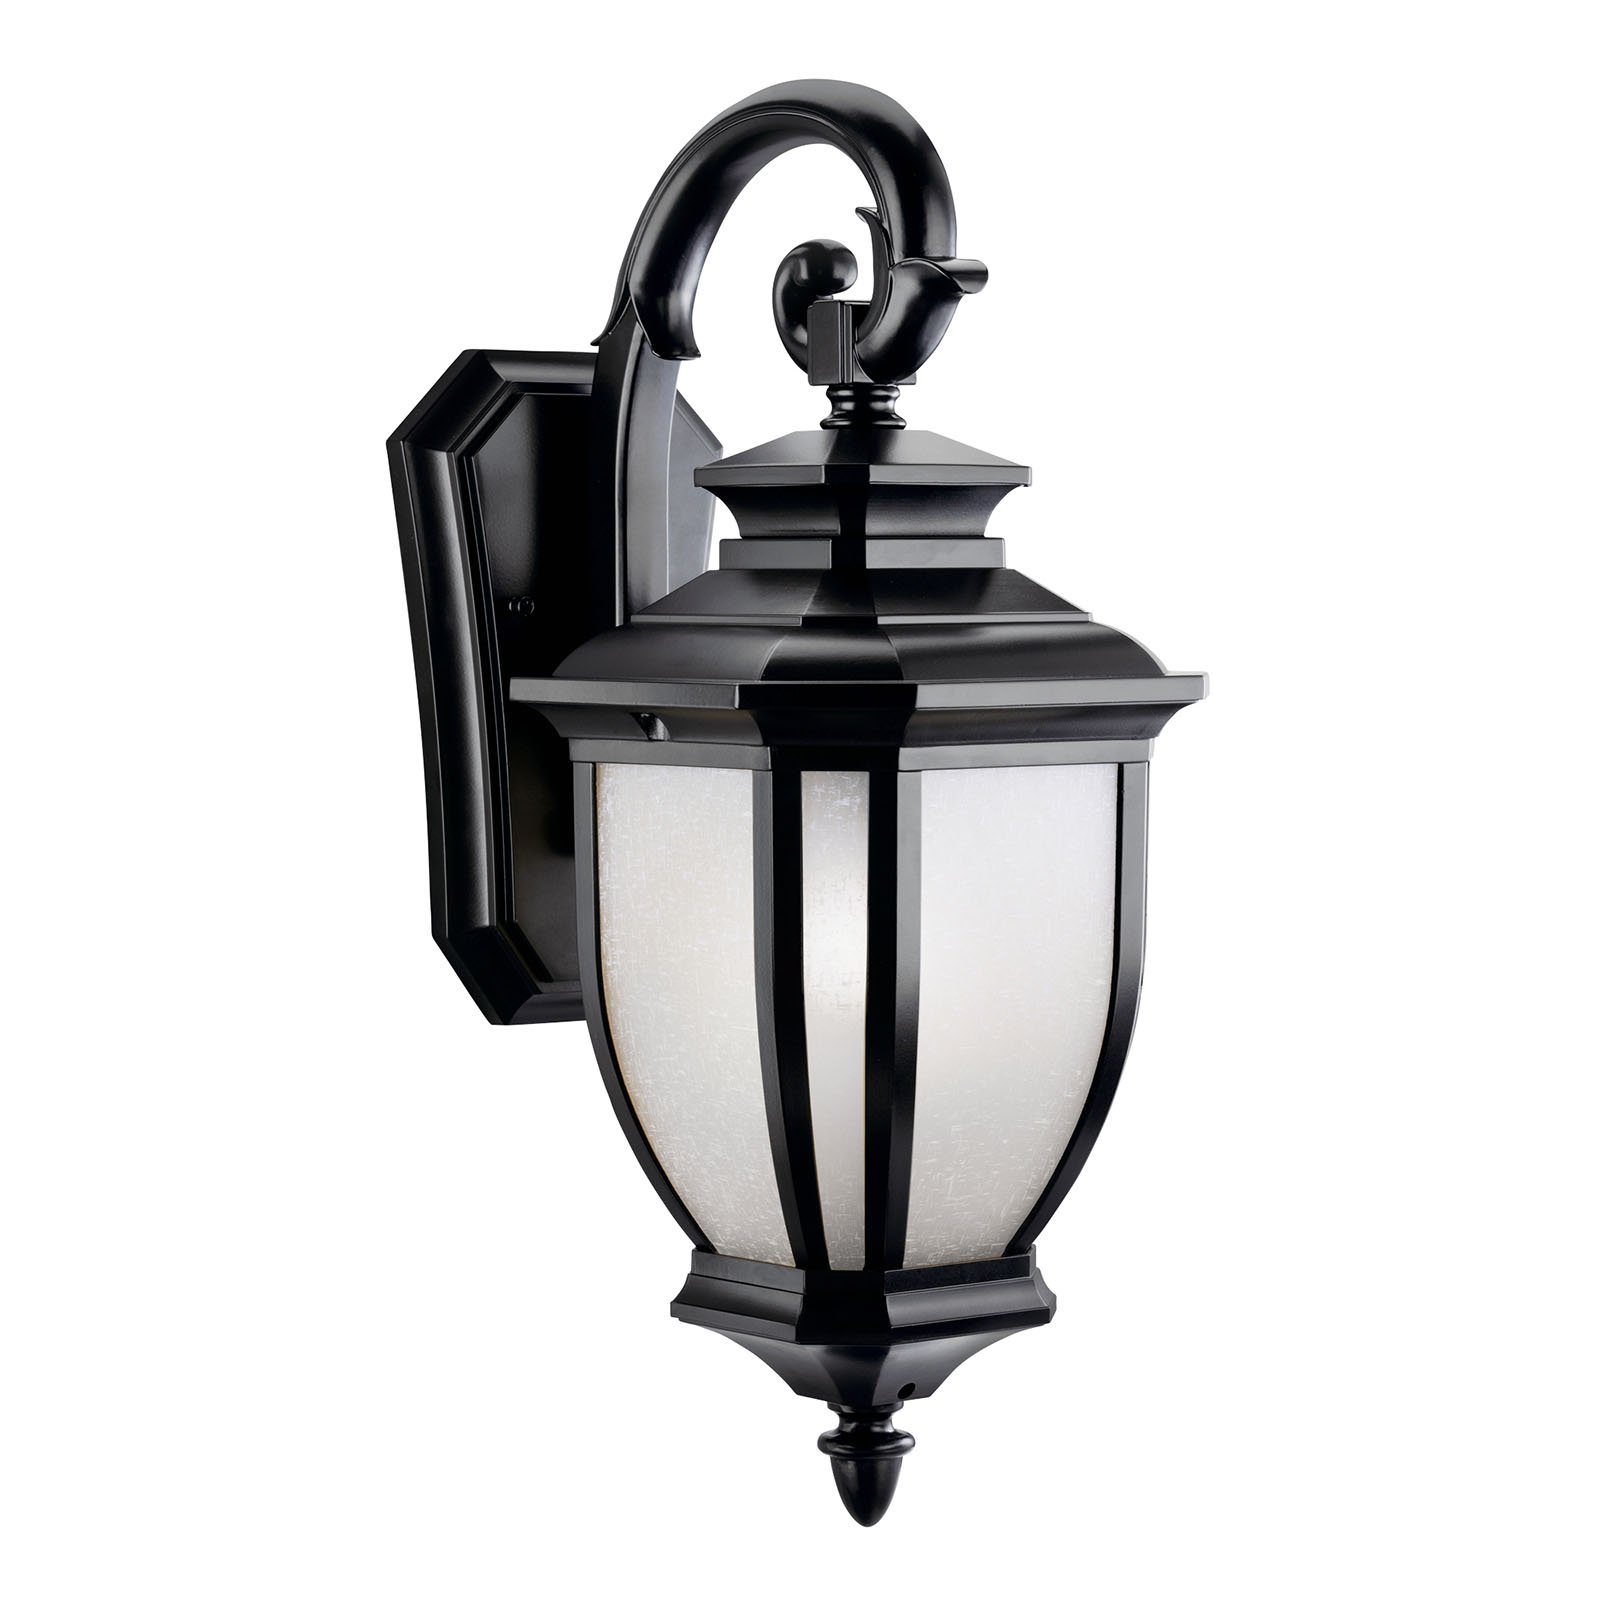 With an unmistakable British influence, this 1 light wall fixture from the elegant Salisbury(TM) collection projects timeless style for exterior spaces. Accented with a classic Black finish and White Linen Glass, this piece is as functional as it is refined.